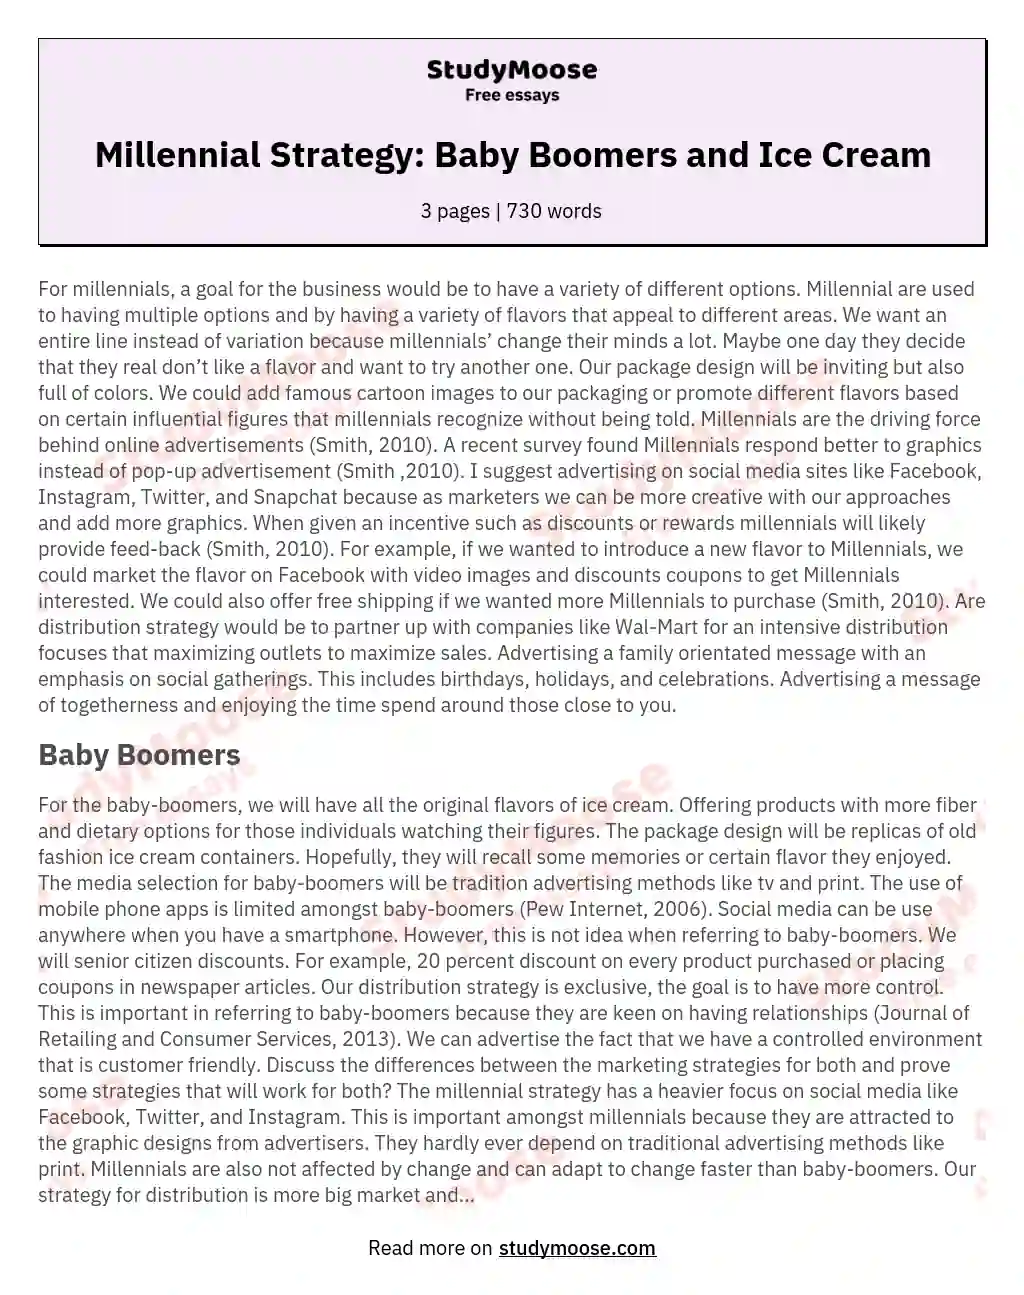 Millennial Strategy: Baby Boomers and Ice Cream essay